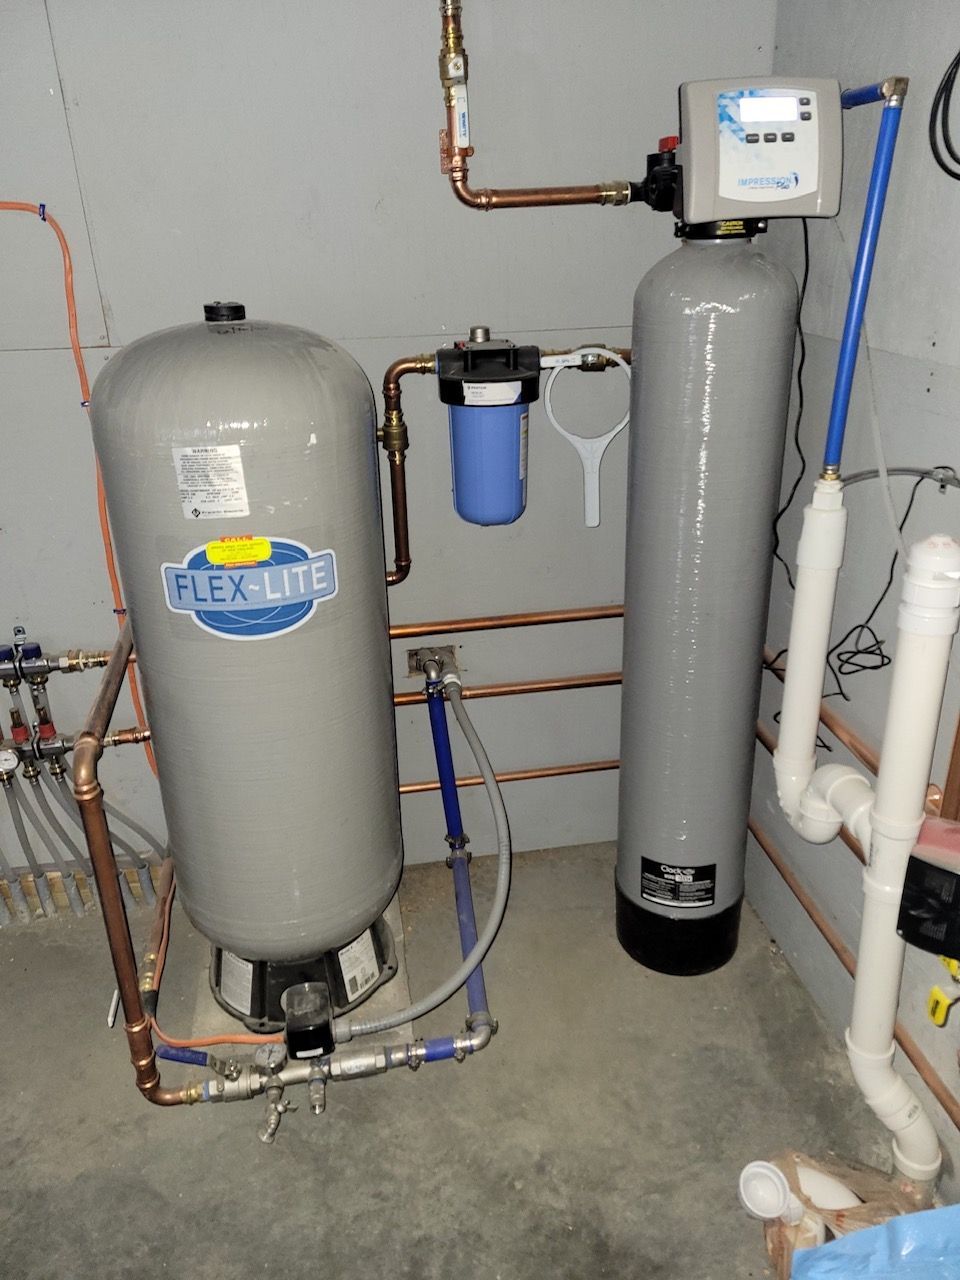 A flexlite water filtration system is installed in a basement